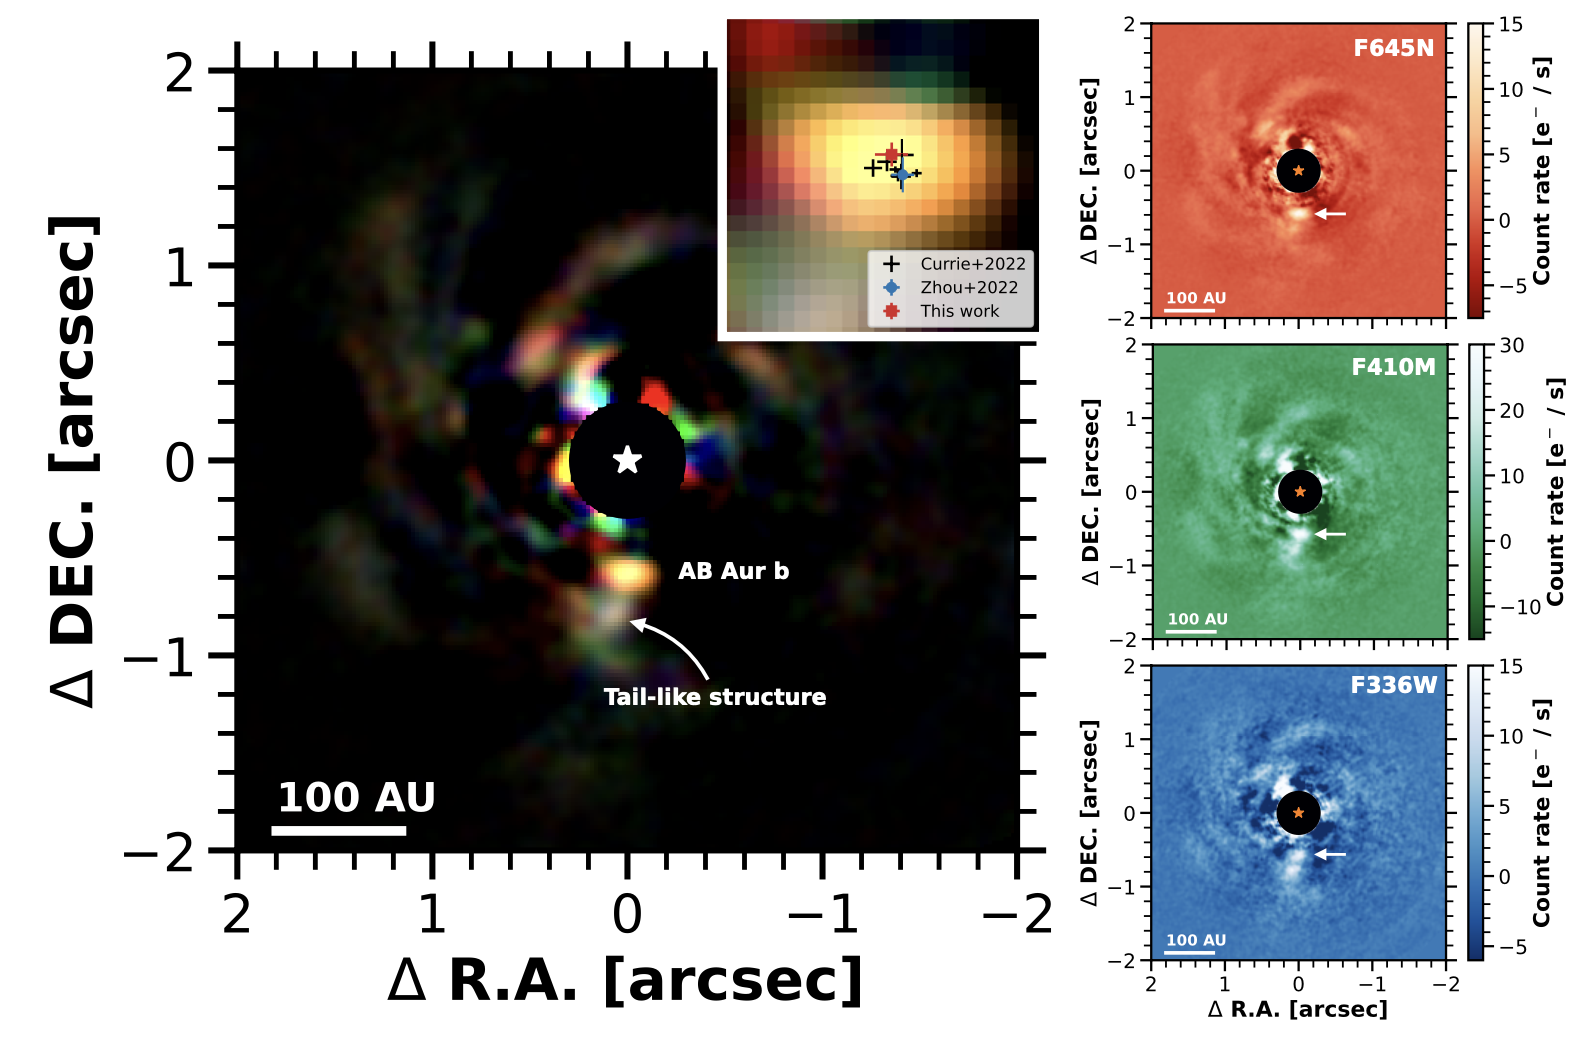 The multi-band images of proplanetary disk around AB Aur.